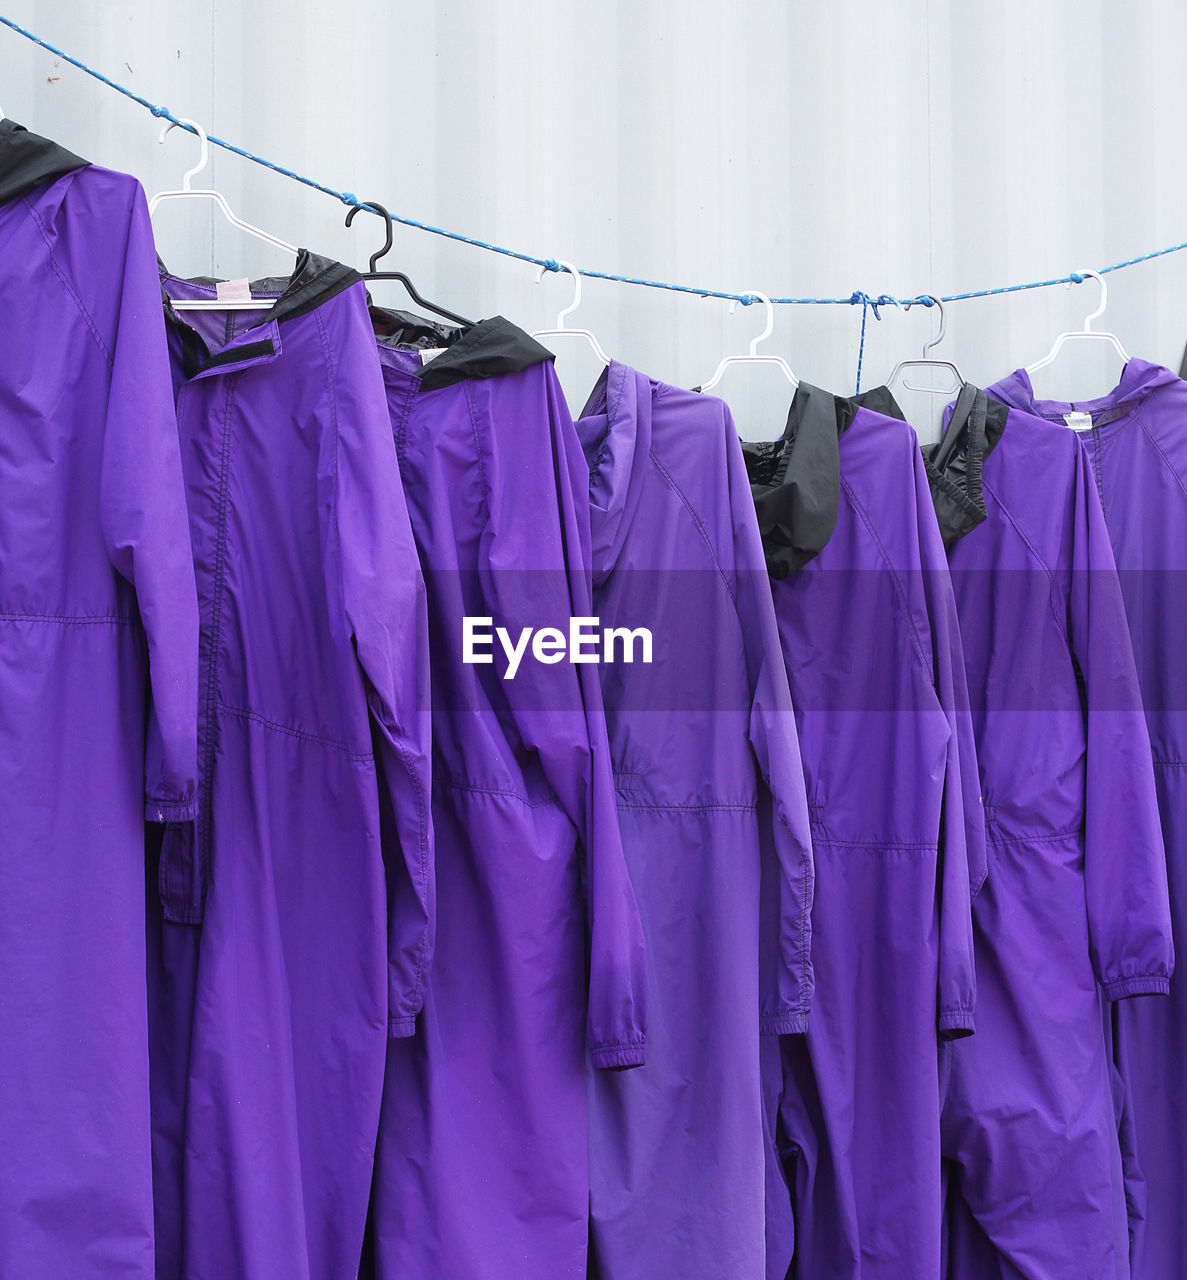 Close-up of purple uniforms hanging on rope